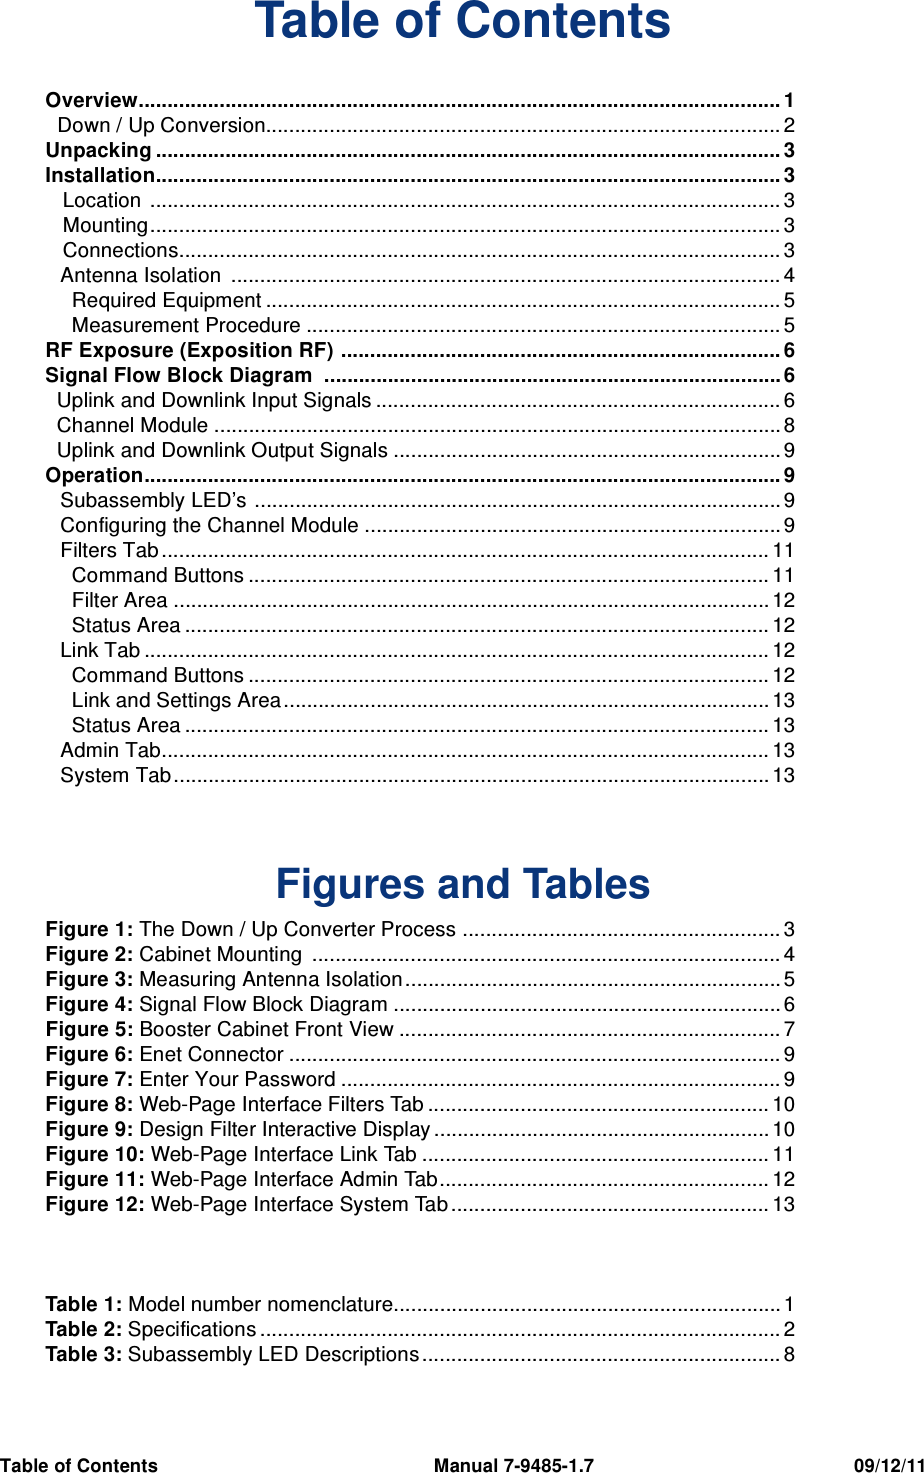 Table of Contents                                                     Manual 7-9485-1.7                                                  09/12/11Table of ContentsOverview............................................................................................................... 1  Down / Up Conversion......................................................................................... 2Unpacking ............................................................................................................ 3Installation............................................................................................................ 3   Location  ............................................................................................................. 3   Mounting............................................................................................................. 3   Connections........................................................................................................ 3Antenna Isolation  ............................................................................................... 4  Required Equipment ......................................................................................... 5  Measurement Procedure .................................................................................. 5RF Exposure (Exposition RF) ............................................................................ 6Signal Flow Block Diagram  ............................................................................... 6  Uplink and Downlink Input Signals ...................................................................... 6  Channel Module .................................................................................................. 8  Uplink and Downlink Output Signals ................................................................... 9Operation.............................................................................................................. 9Subassembly LED’s ........................................................................................... 9Configuring the Channel Module ........................................................................ 9Filters Tab ......................................................................................................... 11  Command Buttons .......................................................................................... 11  Filter Area ....................................................................................................... 12  Status Area ..................................................................................................... 12Link Tab ............................................................................................................ 12  Command Buttons .......................................................................................... 12  Link and Settings Area.................................................................................... 13  Status Area ..................................................................................................... 13Admin Tab......................................................................................................... 13System Tab ....................................................................................................... 13     Figures and TablesFigure 1: The Down / Up Converter Process ....................................................... 3Figure 2: Cabinet Mounting  ................................................................................. 4Figure 3: Measuring Antenna Isolation................................................................. 5Figure 4: Signal Flow Block Diagram ................................................................... 6Figure 5: Booster Cabinet Front View .................................................................. 7Figure 6: Enet Connector ..................................................................................... 9Figure 7: Enter Your Password ............................................................................ 9Figure 8: Web-Page Interface Filters Tab ........................................................... 10Figure 9: Design Filter Interactive Display .......................................................... 10Figure 10: Web-Page Interface Link Tab ............................................................ 11Figure 11: Web-Page Interface Admin Tab......................................................... 12Figure 12: Web-Page Interface System Tab ....................................................... 13Table 1: Model number nomenclature................................................................... 1Table 2: Specifications .......................................................................................... 2Table 3: Subassembly LED Descriptions .............................................................. 8